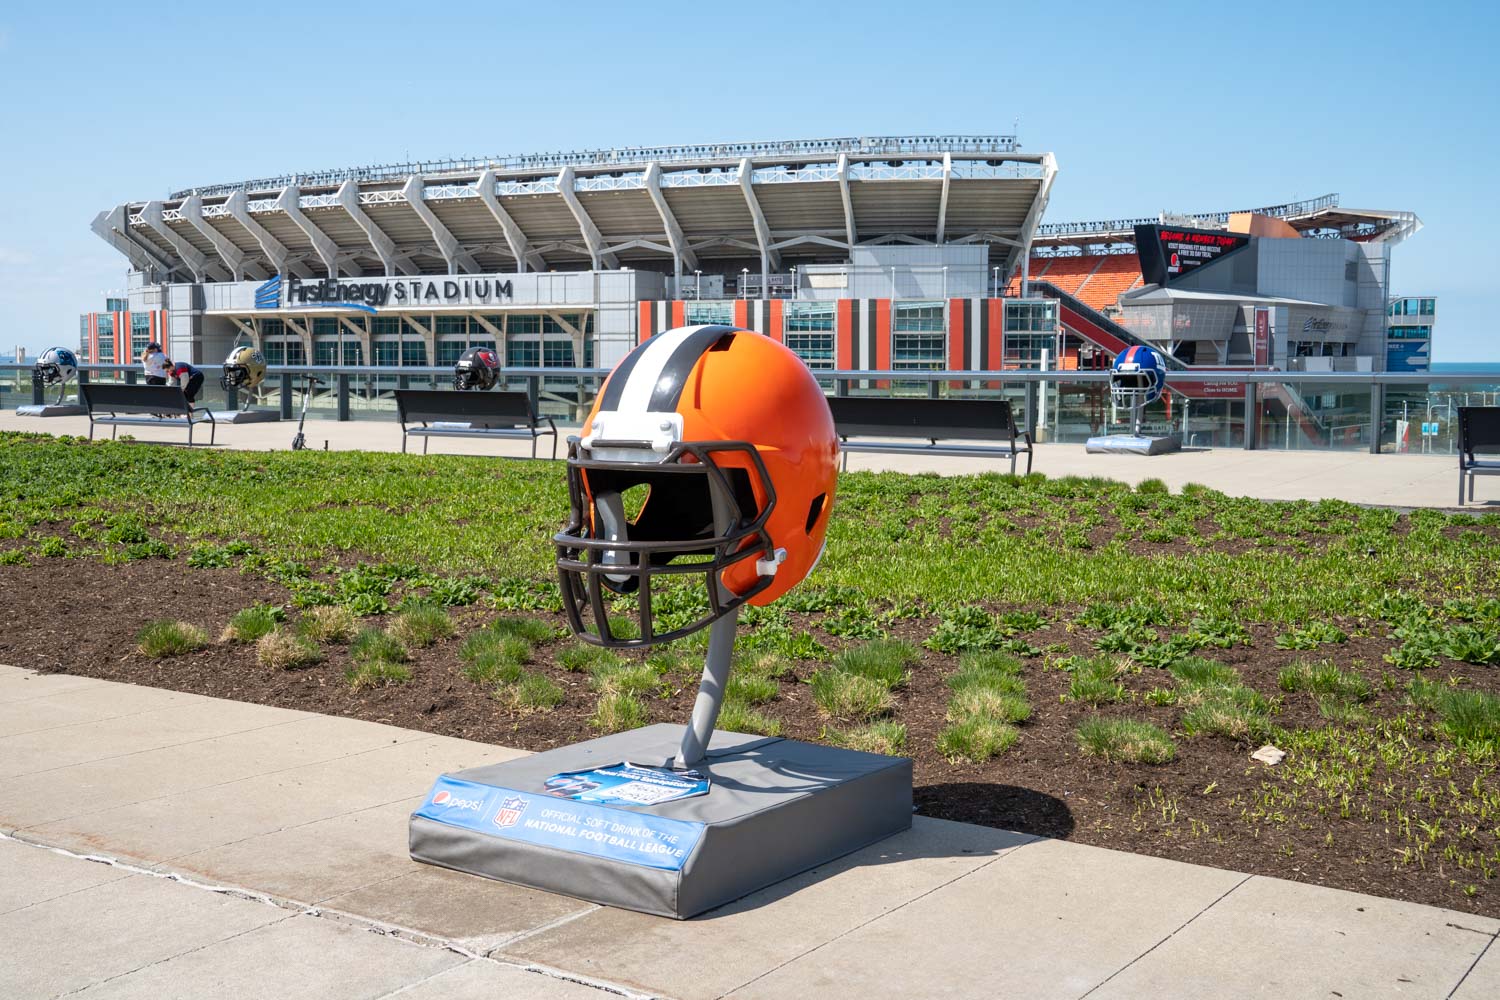 Cleveland Browns Football Game Tips: Know Before You Go